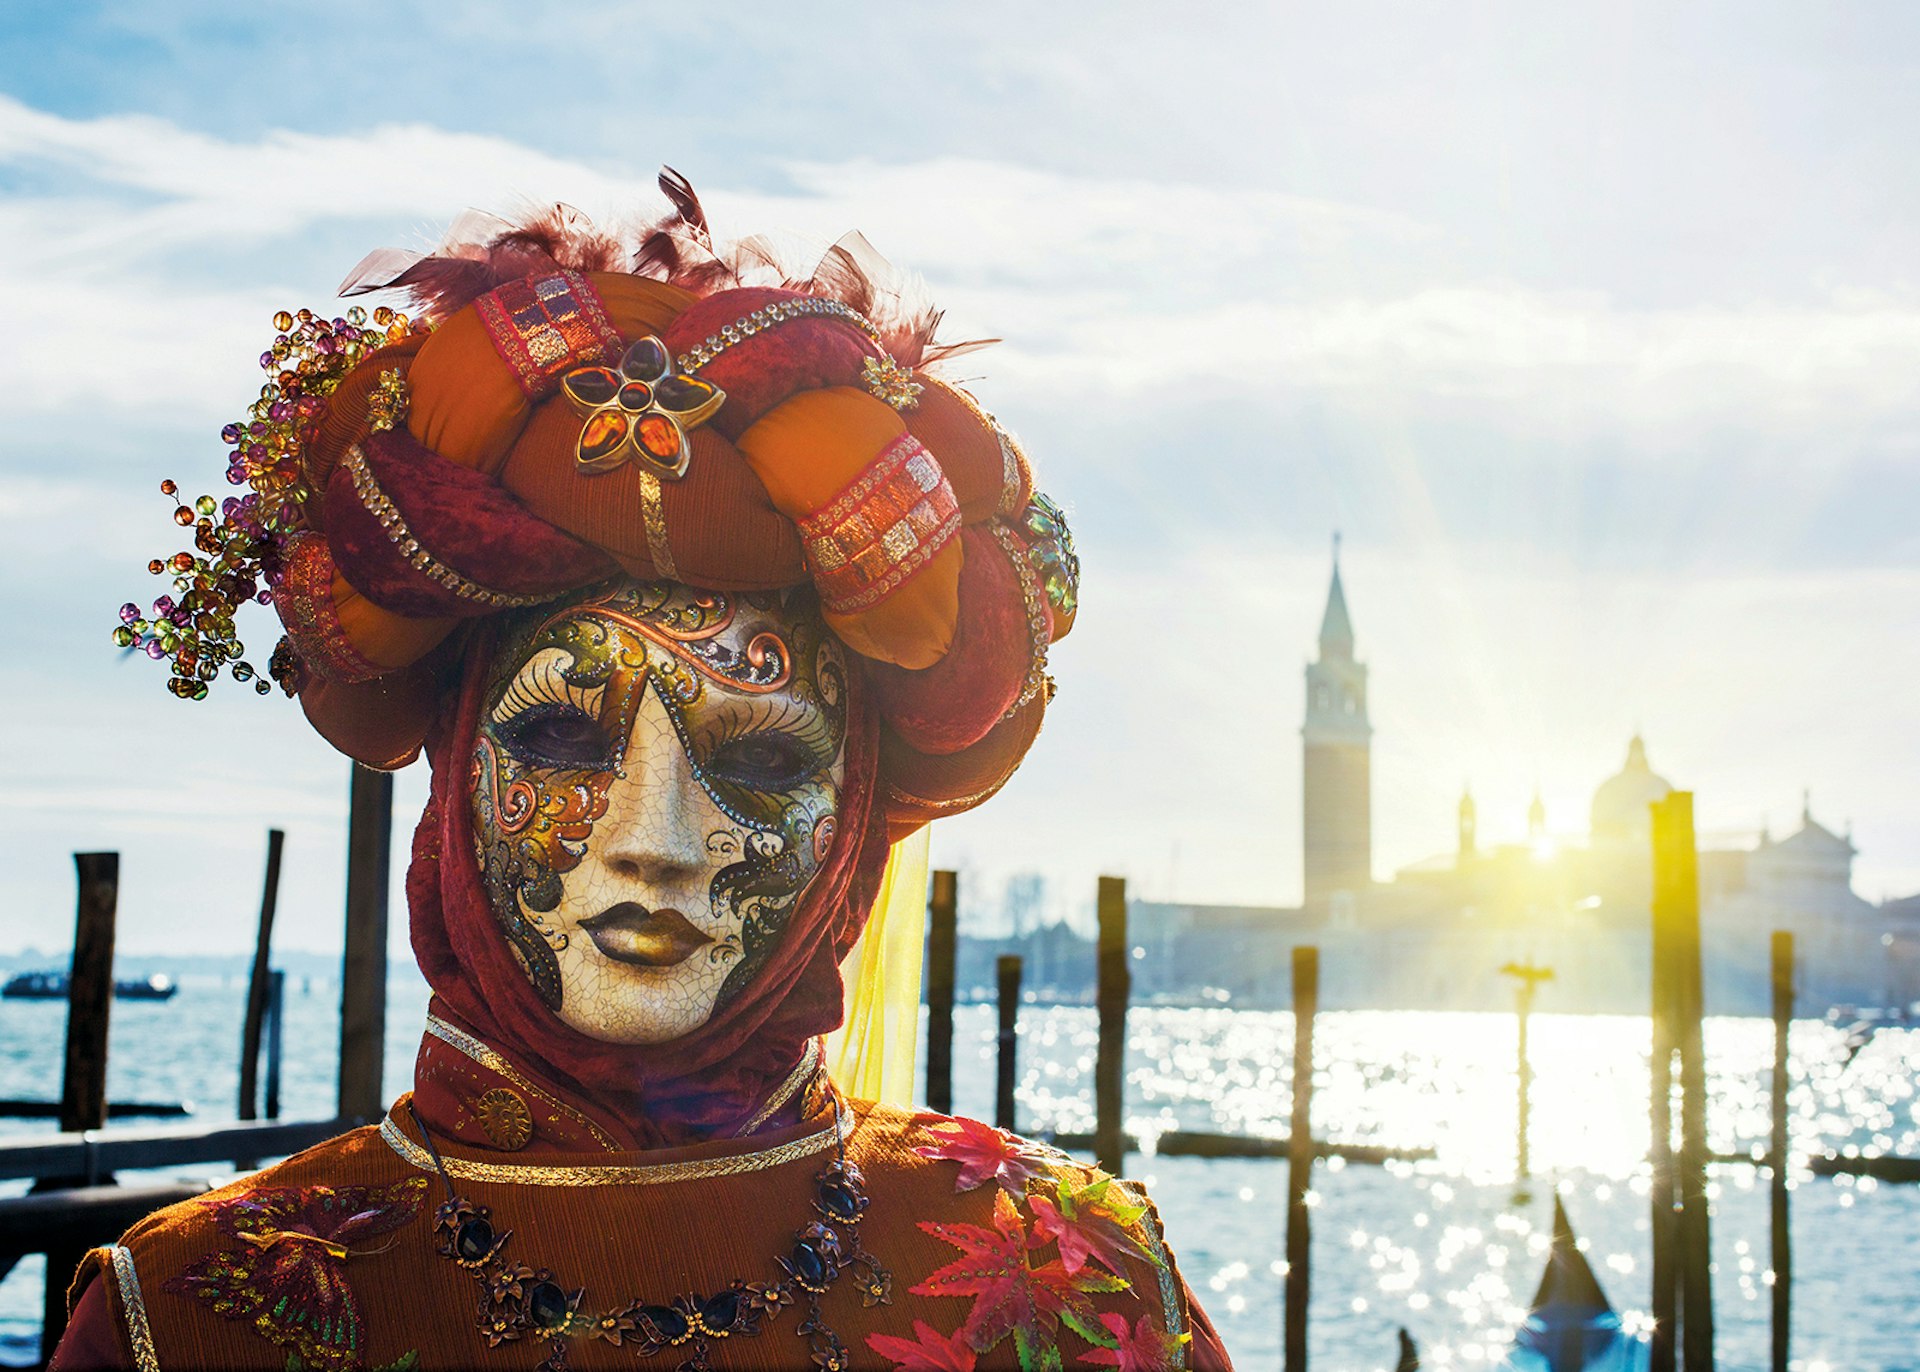 Don't come dressed down to Venice's famous Carnevale © Buena Vista Images / Getty Images